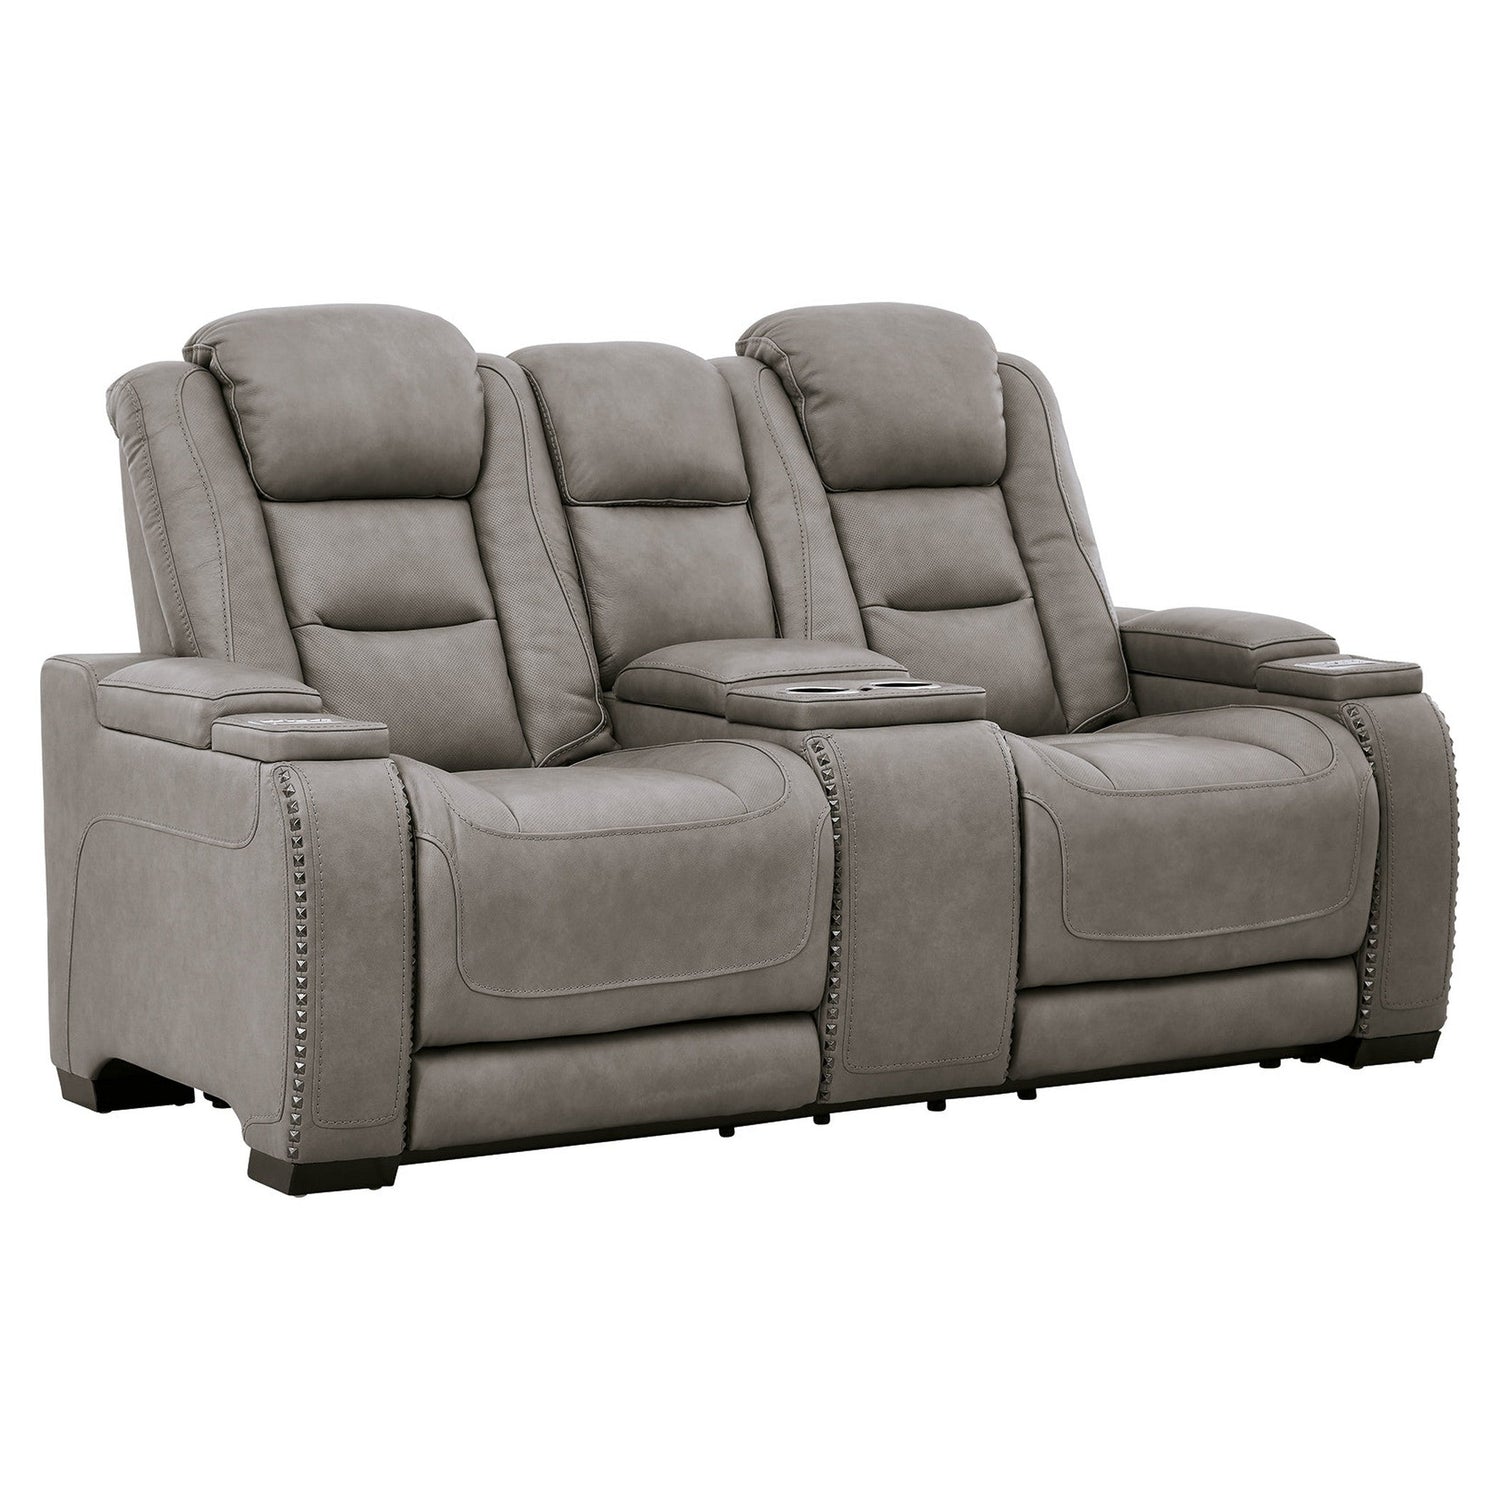 The Man-Den Power Reclining Loveseat with Console Ash-U8530518